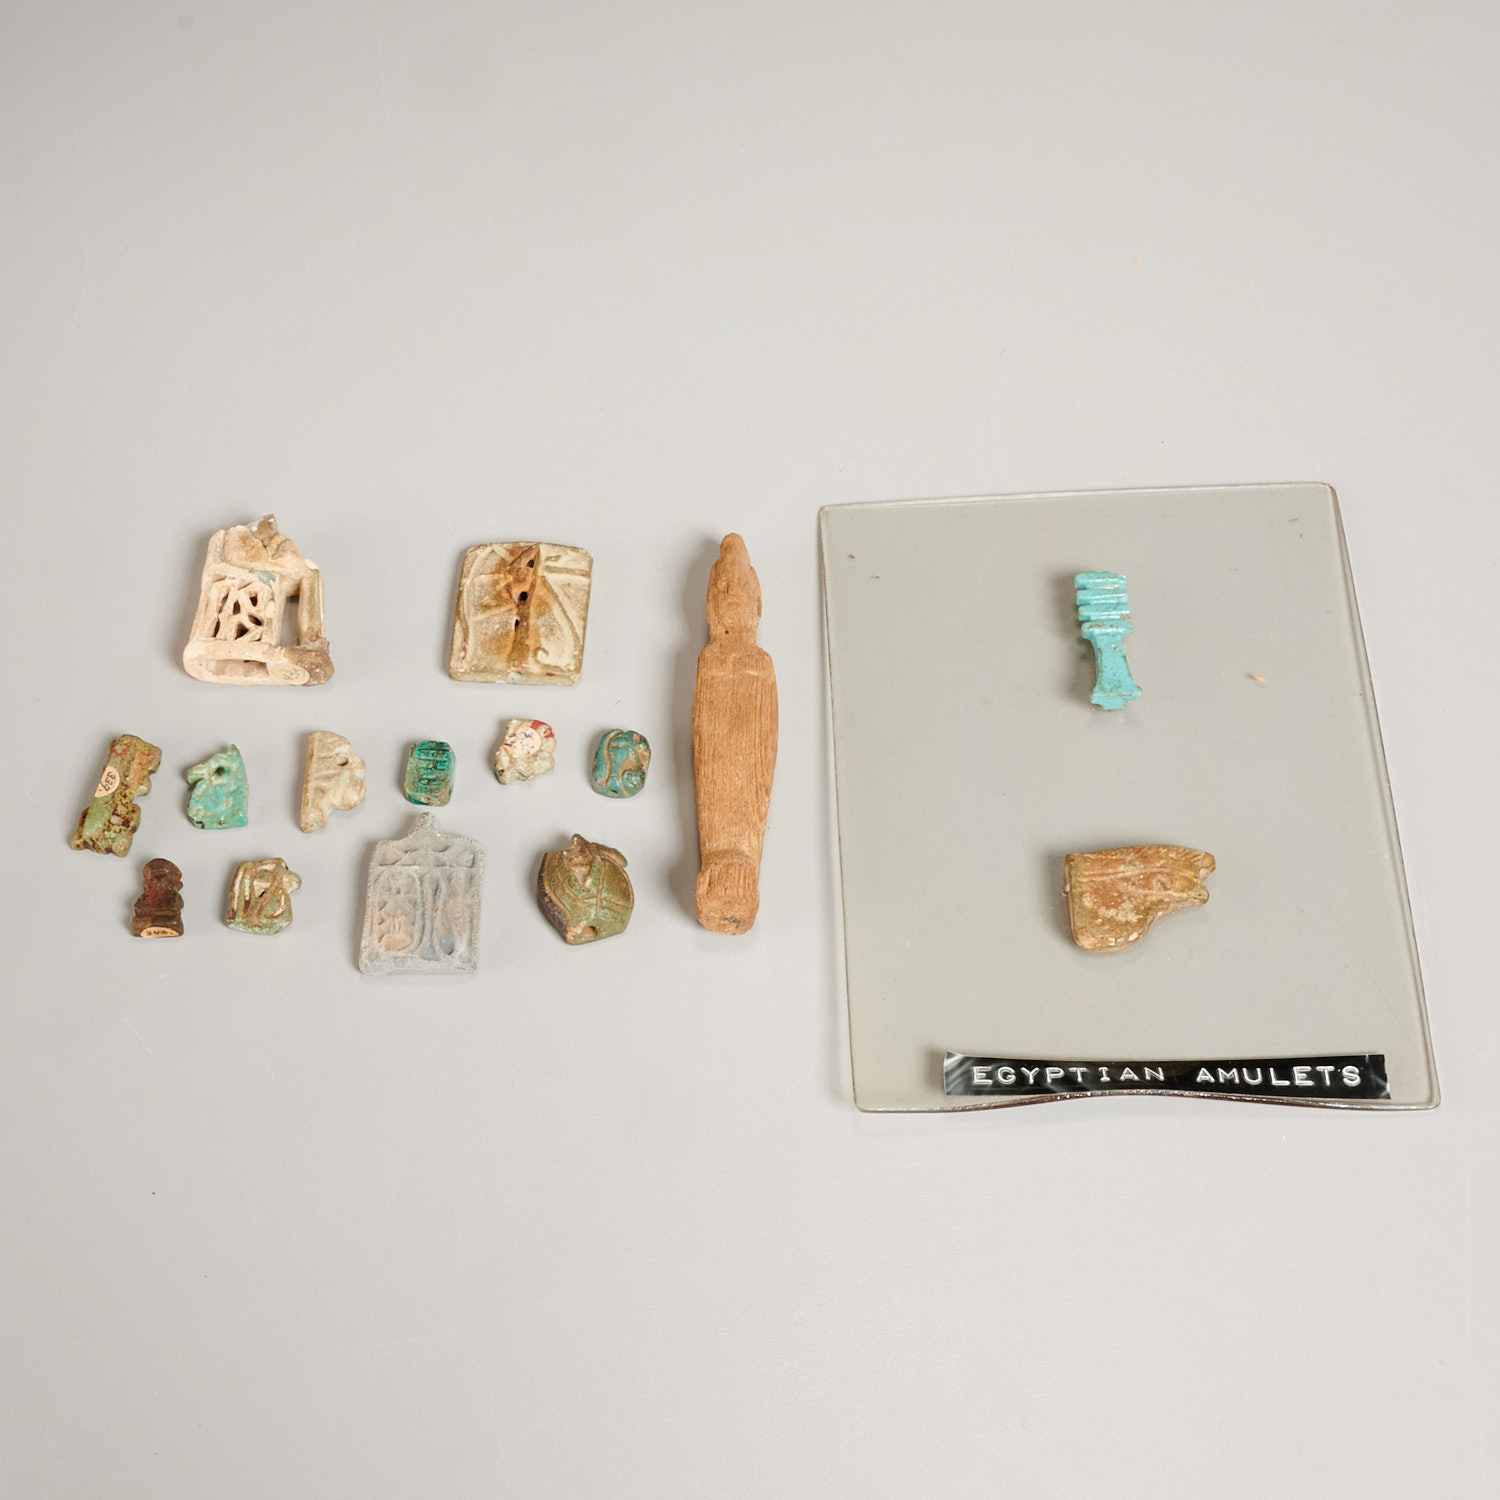  15 ANCIENT EGYPTIAN AMULETS  2ce9dd